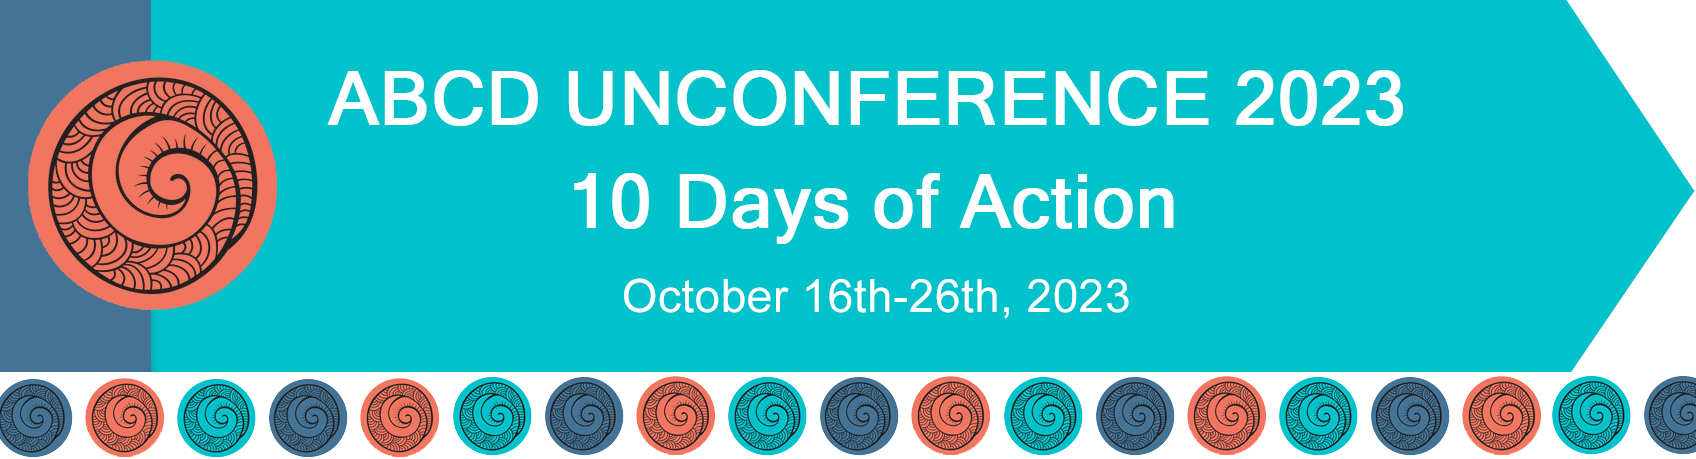 ABCD Unconference Banner